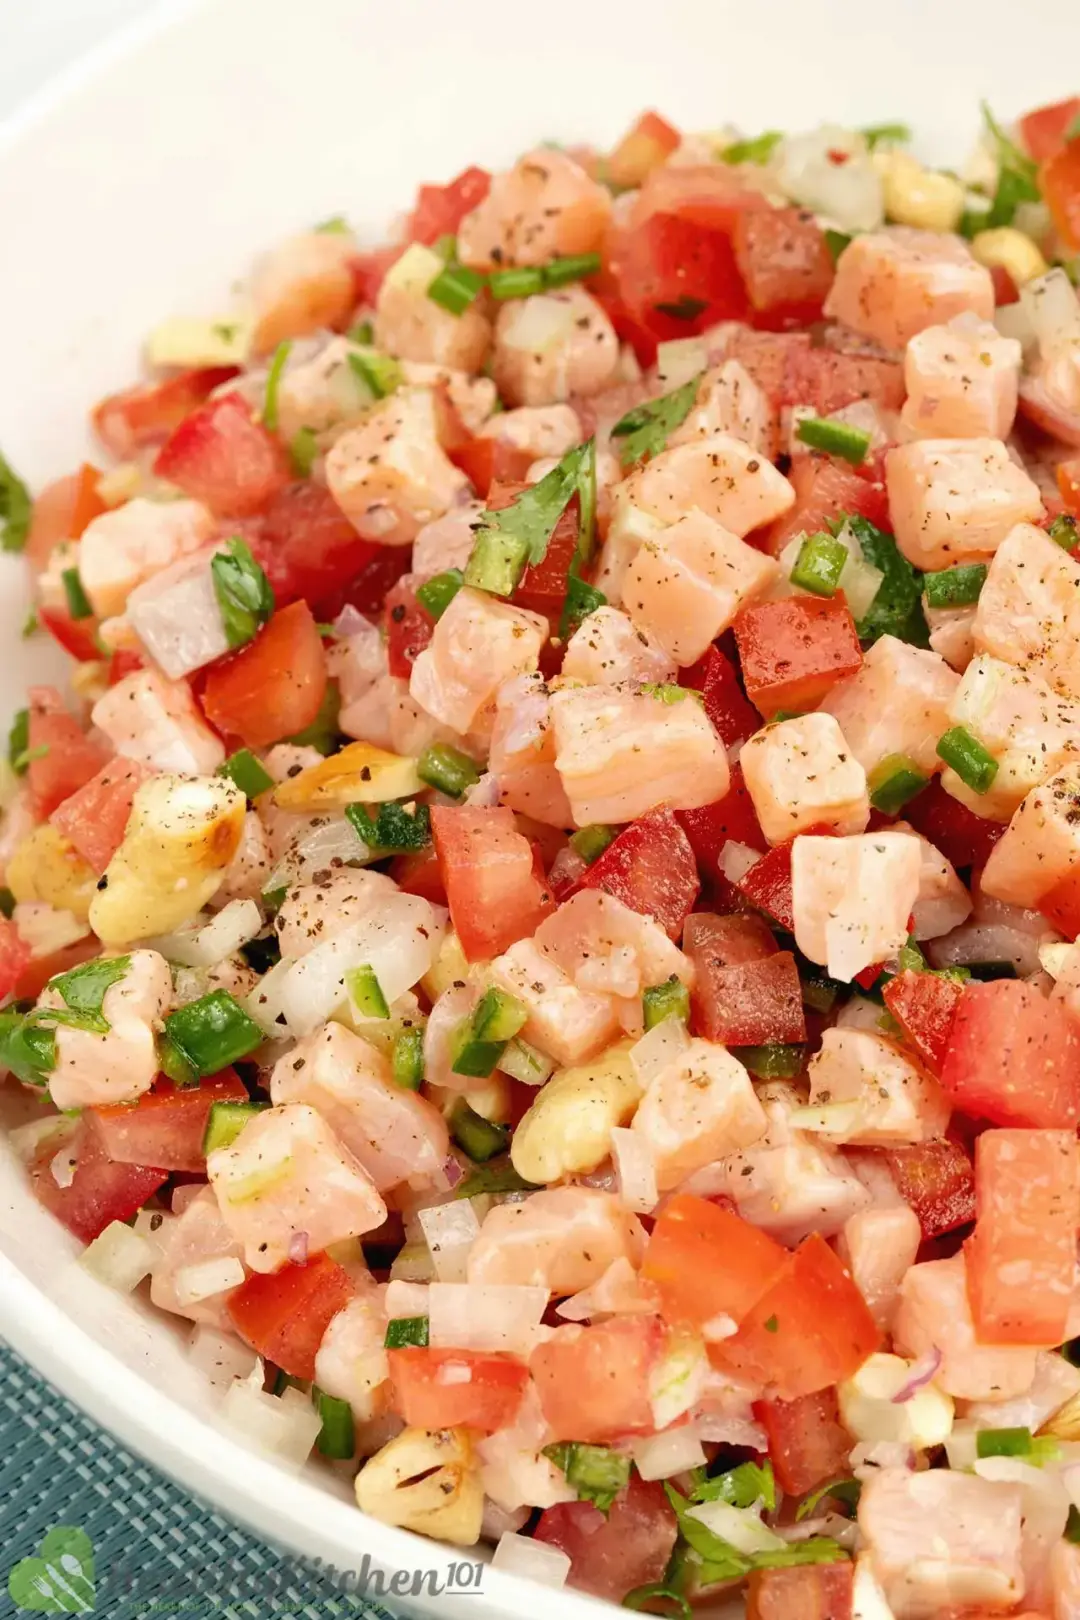 A mixture of cubed salmon, tomato, and chopped cilantro